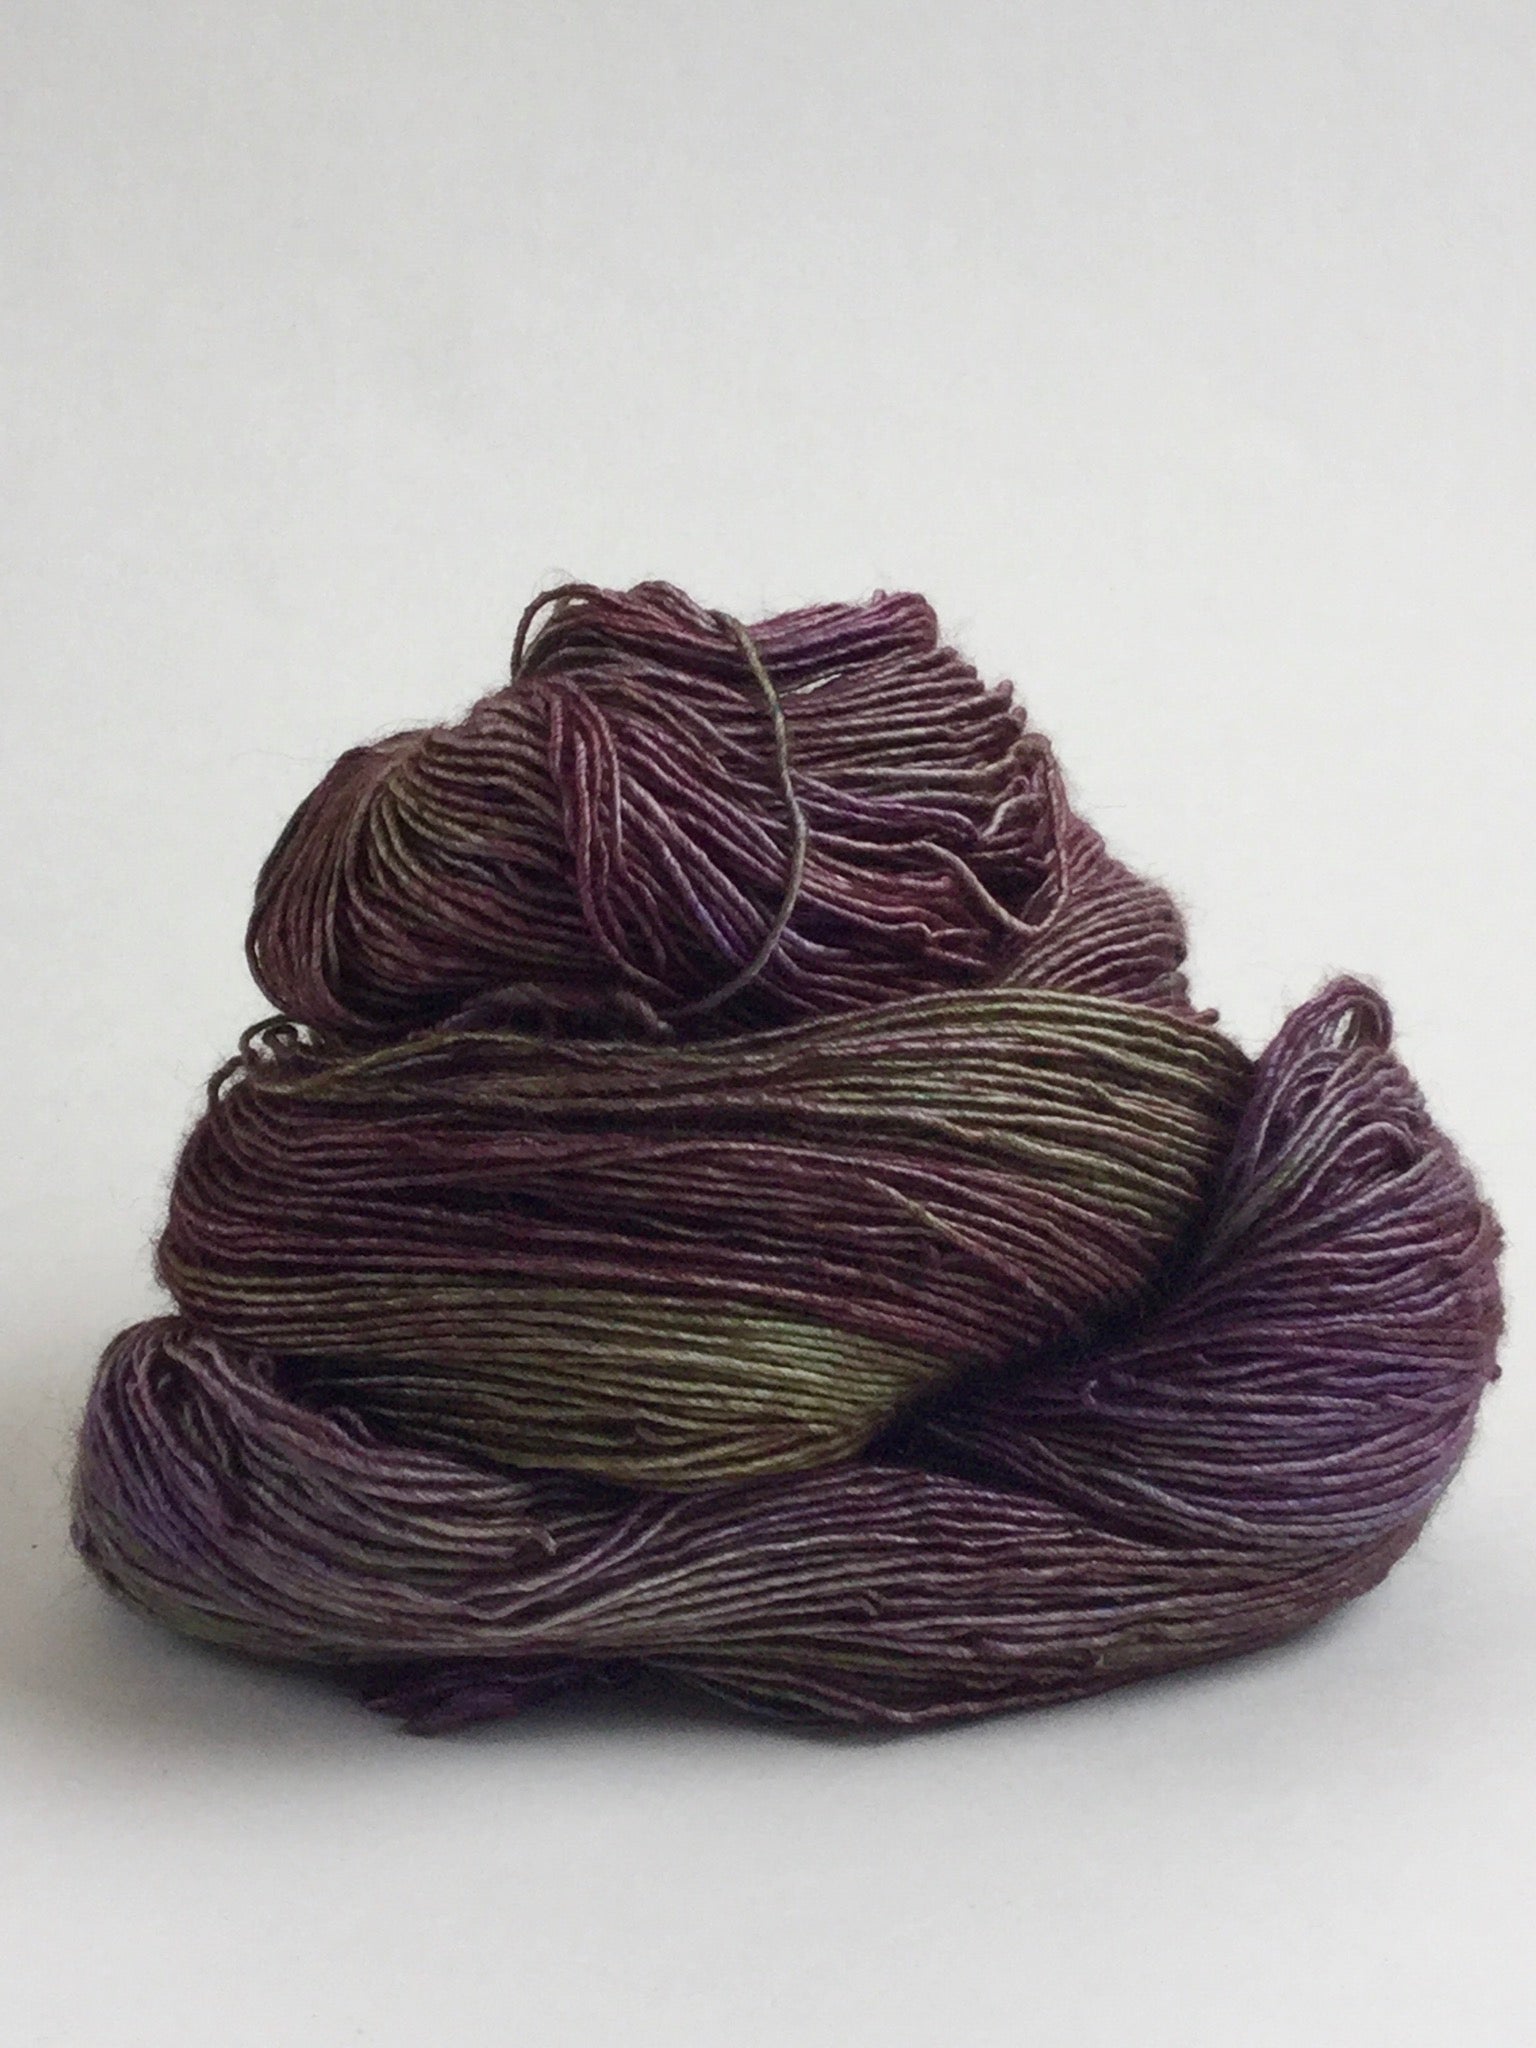 Marvelous - River Silk and Merino from Tributary Yarns